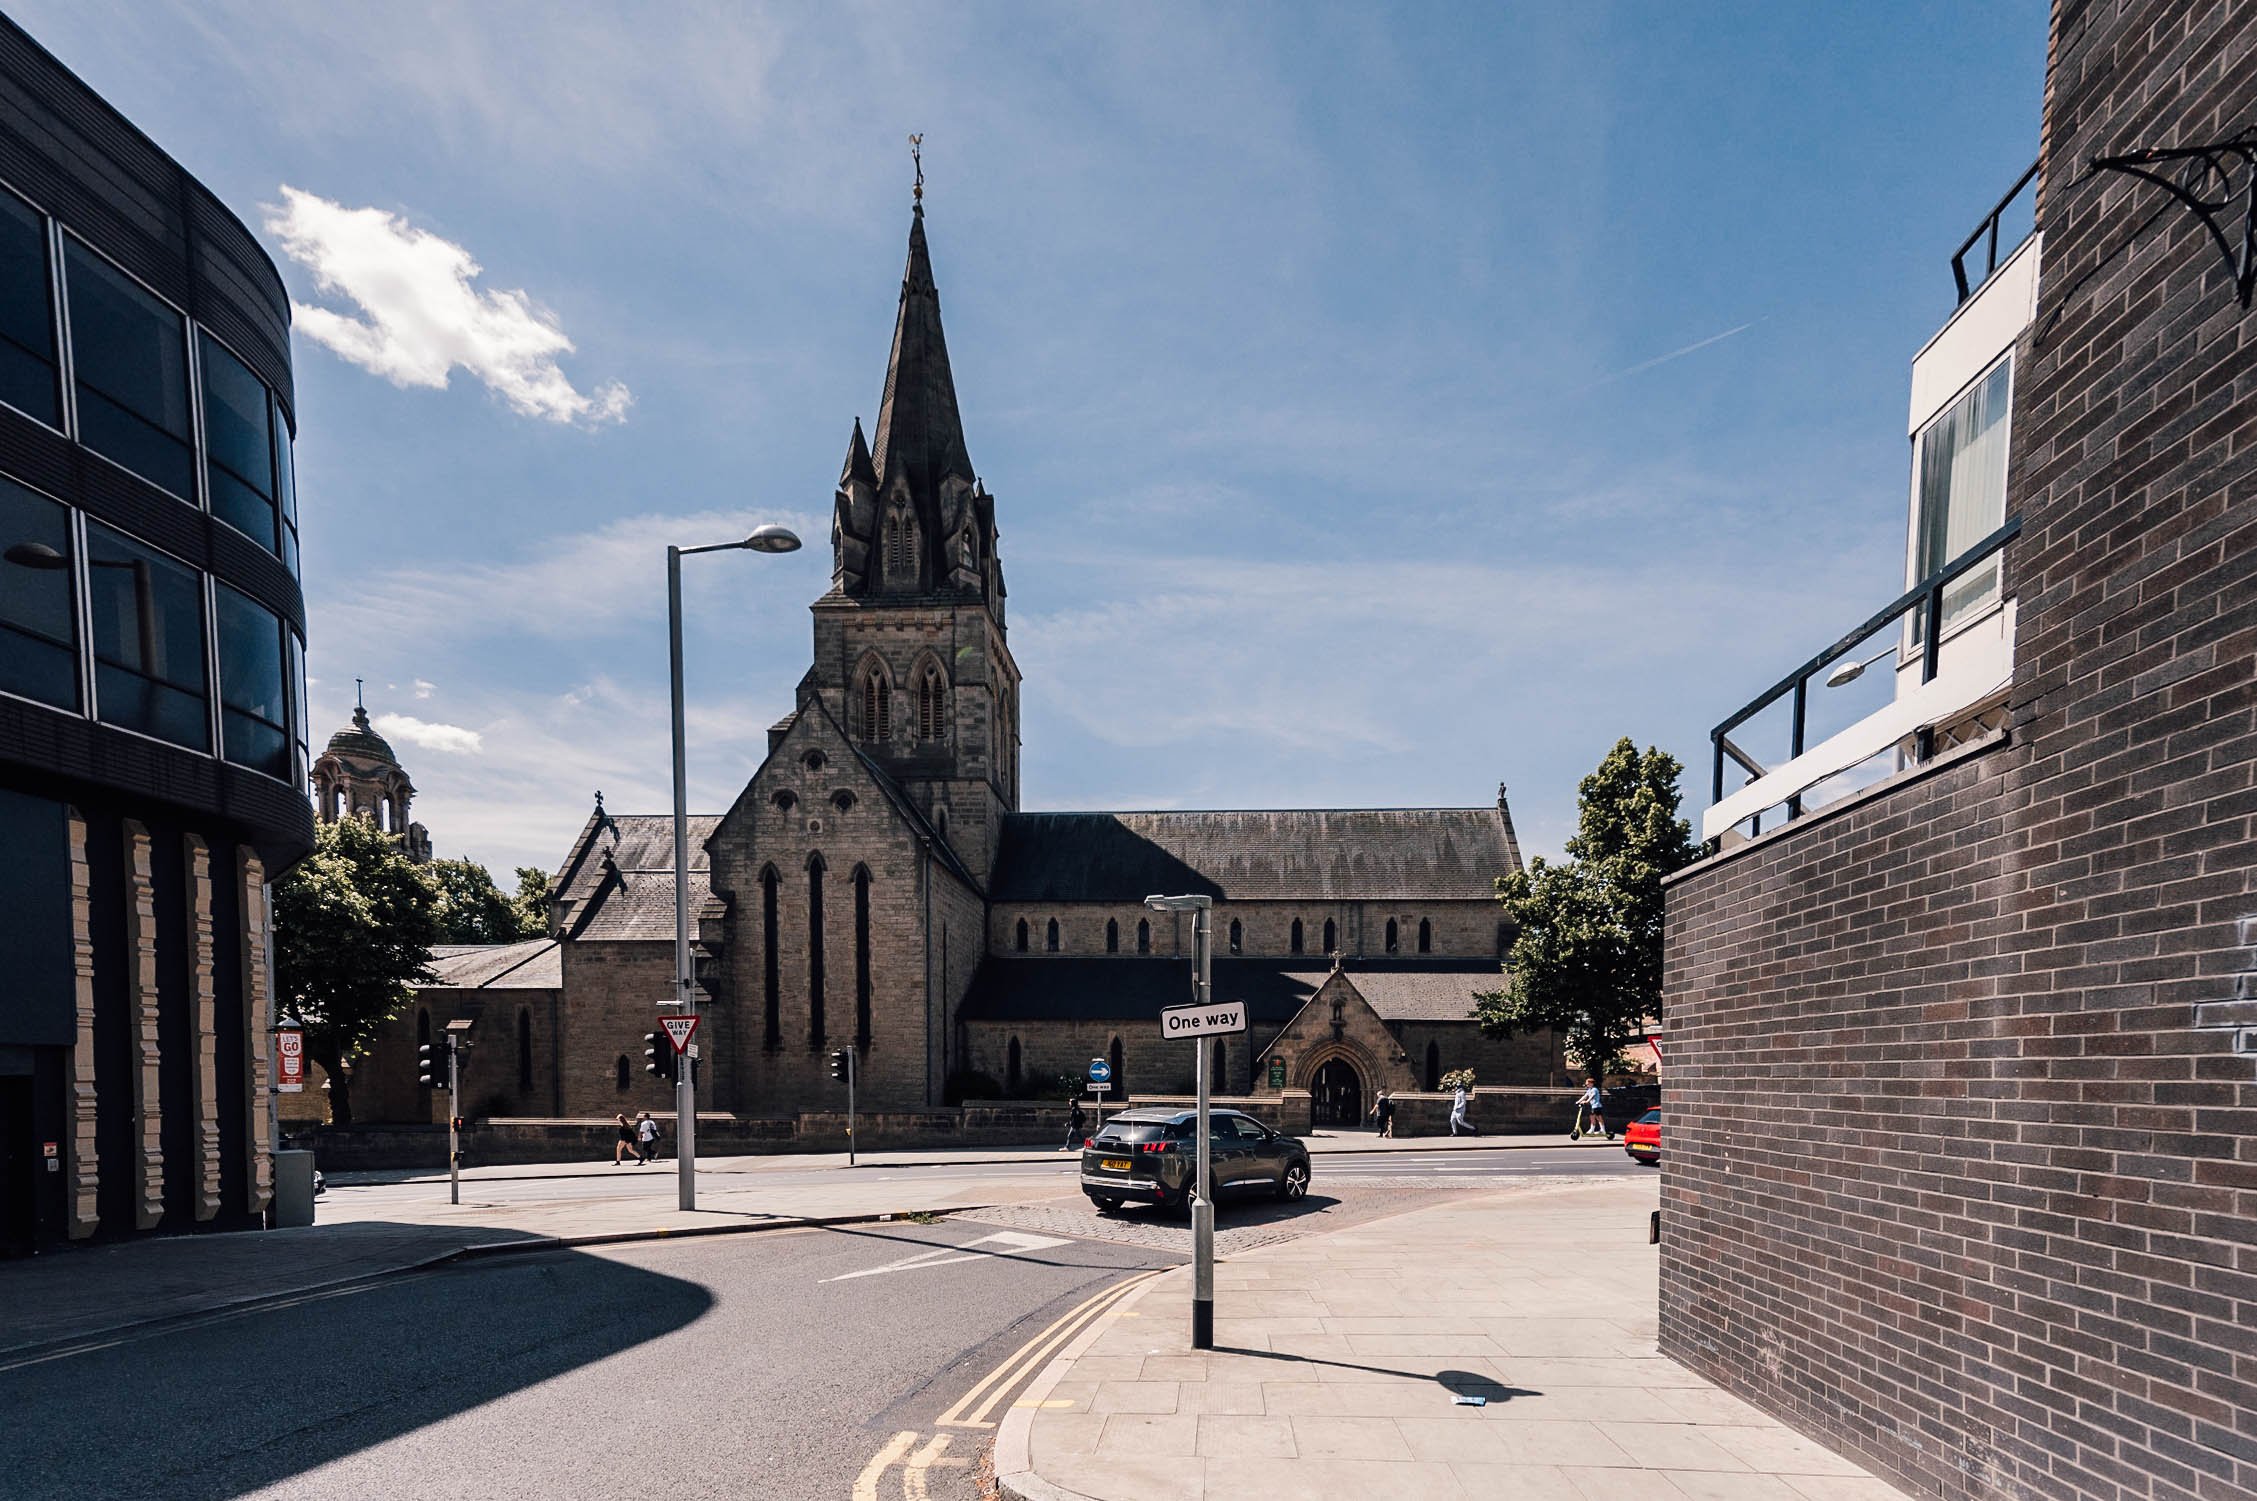 exterior view of St Barnabas cathedral, Nottingham.